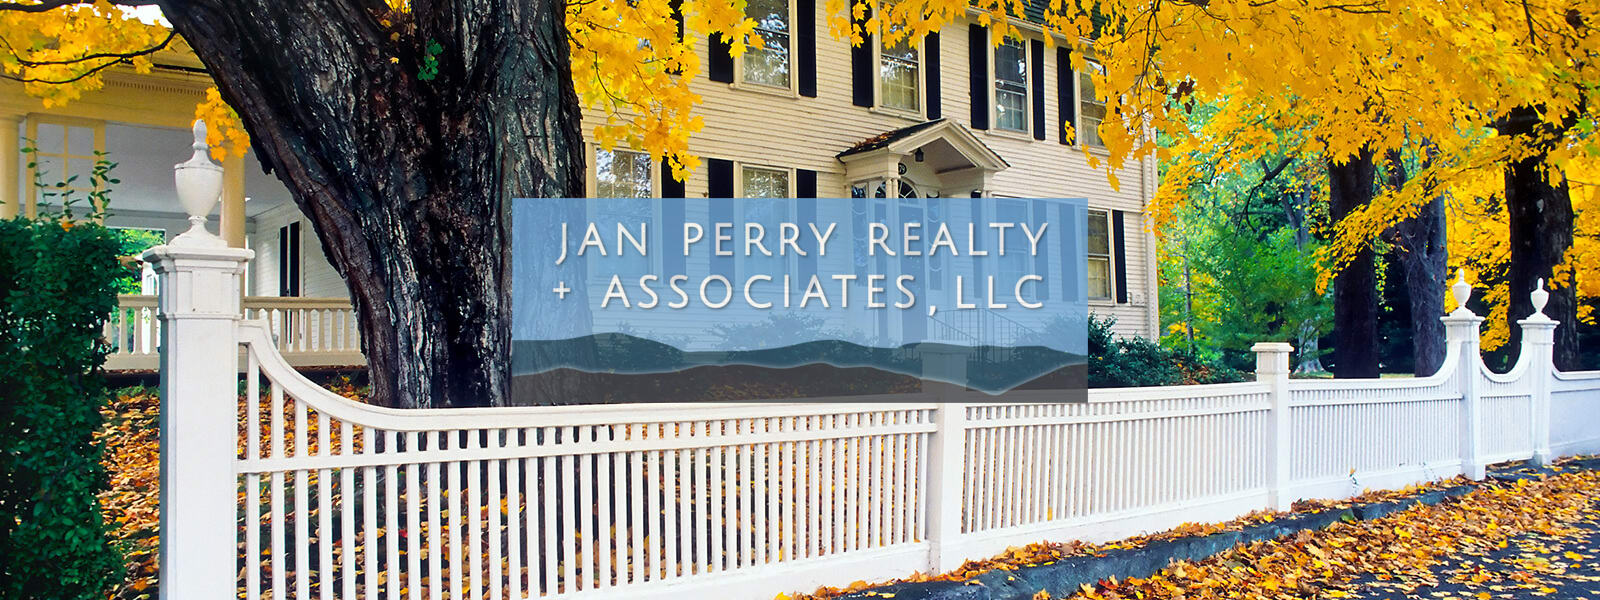 Jan Perry Realty